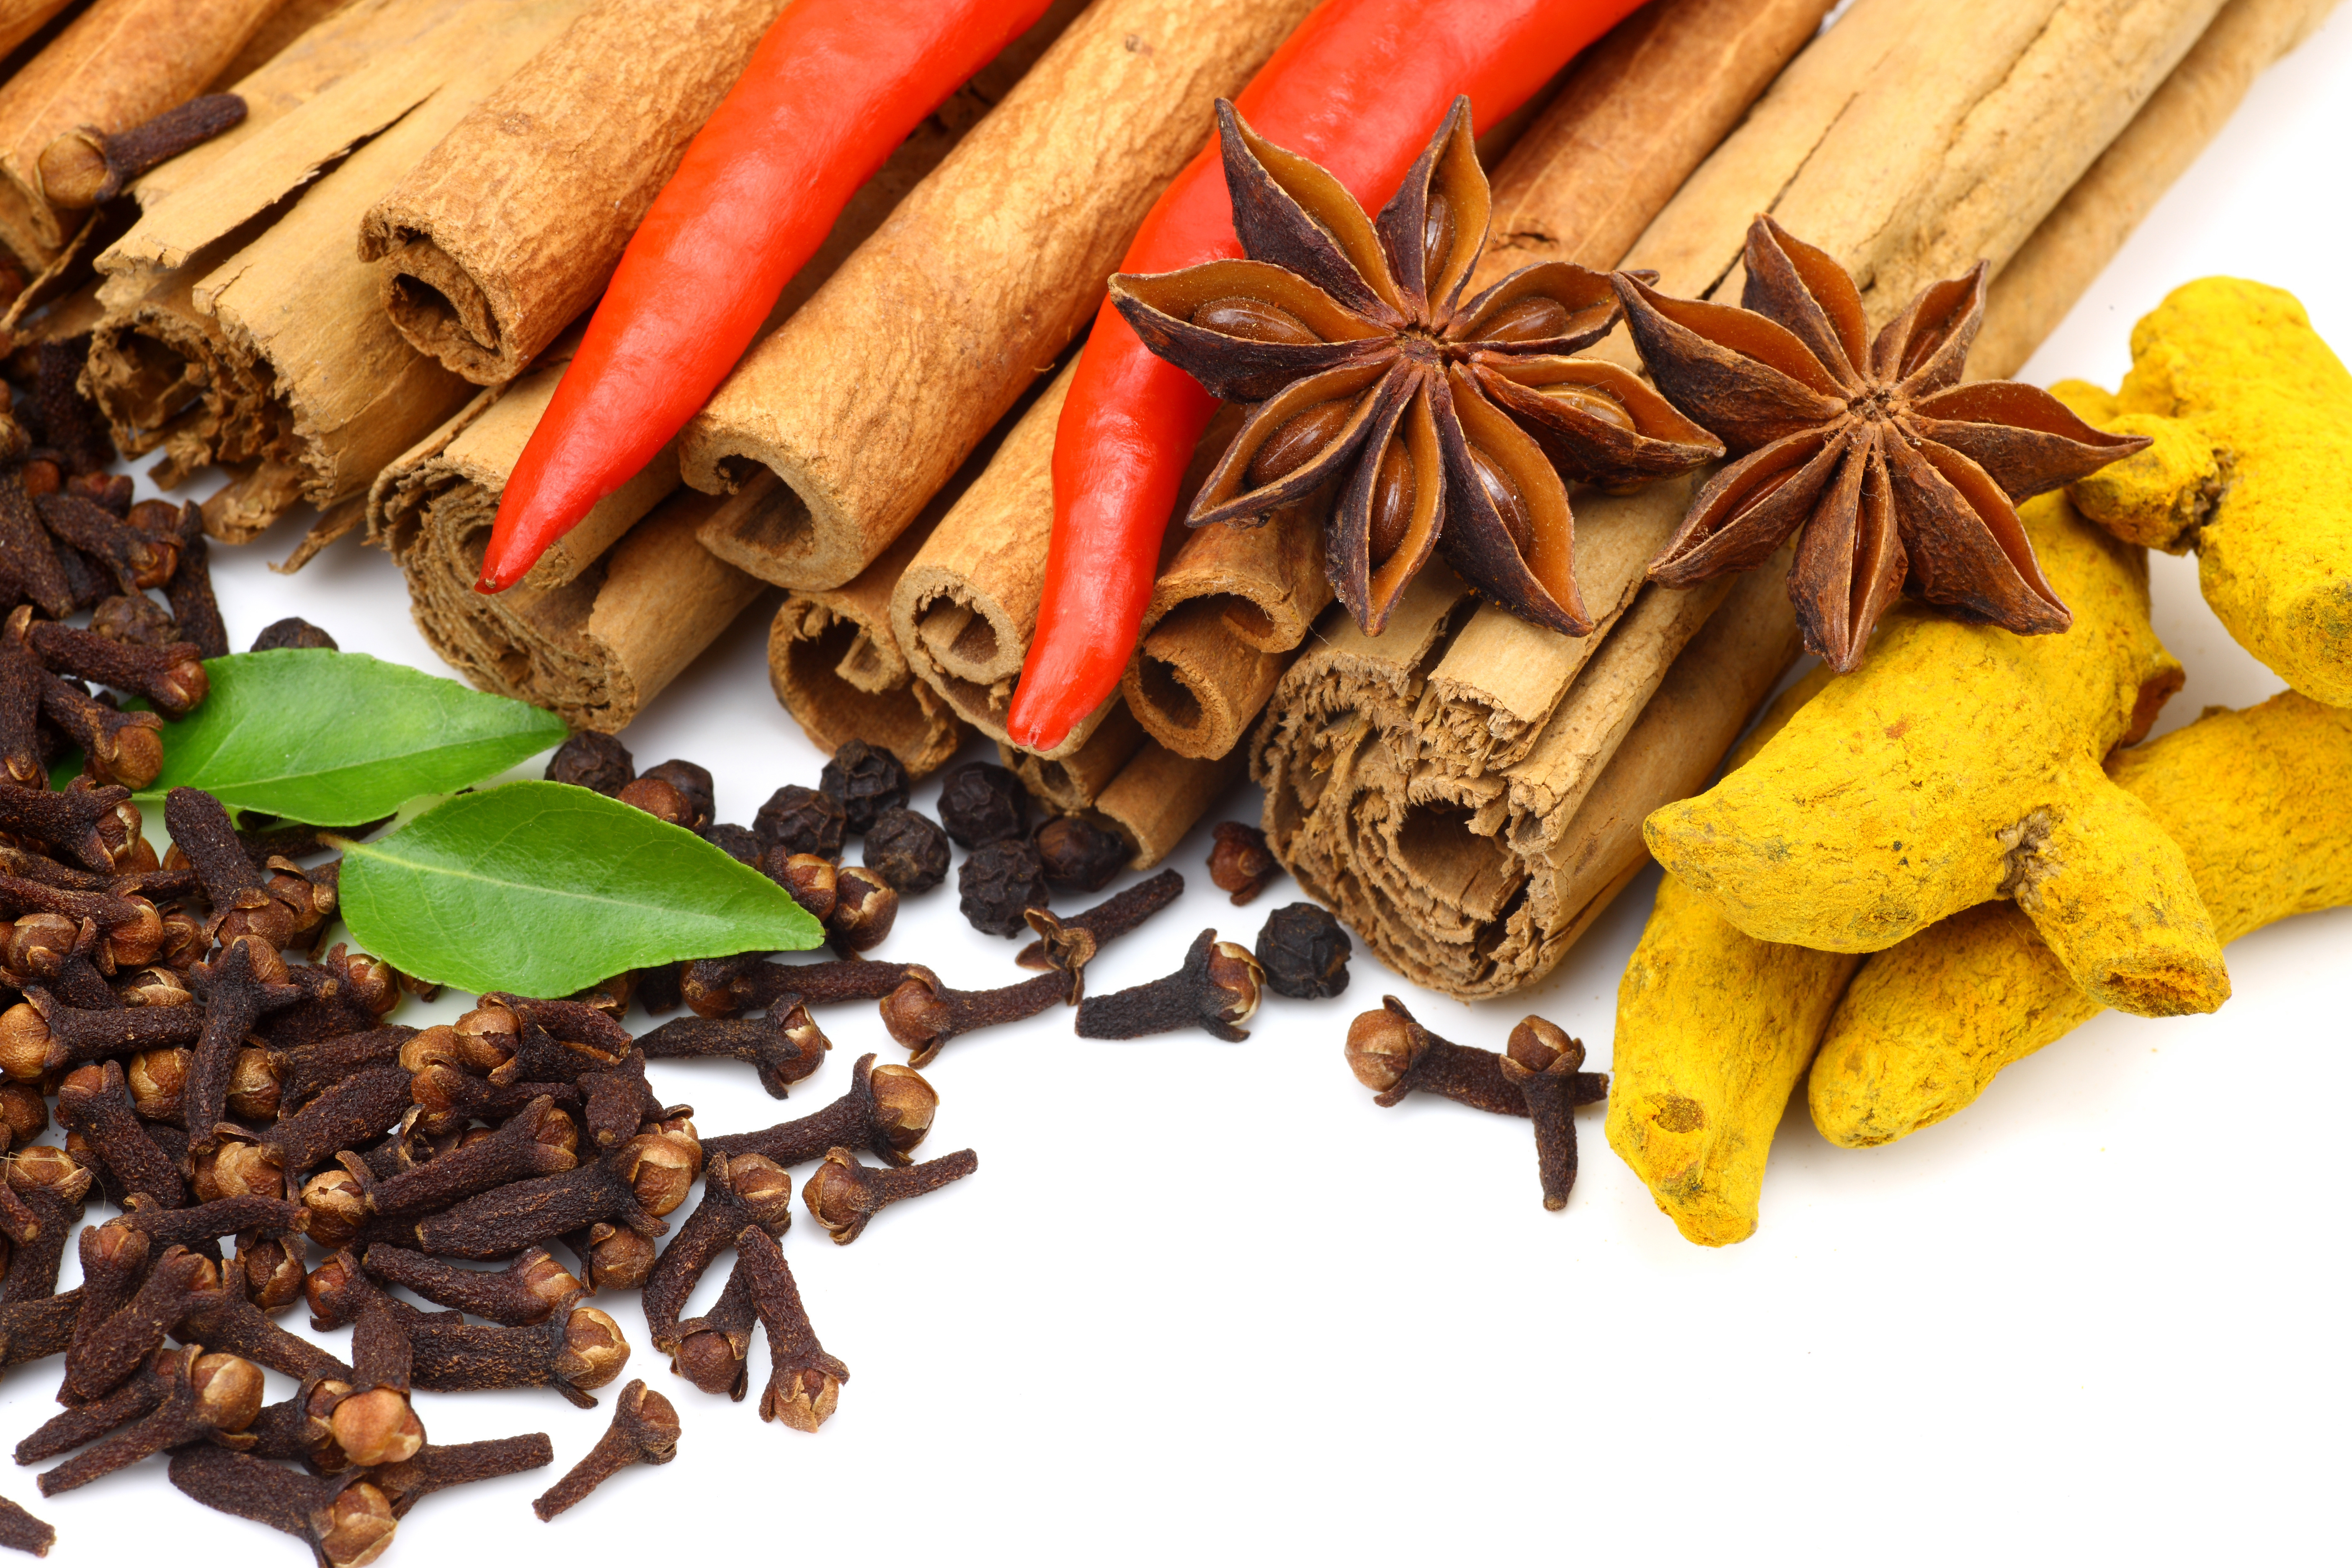 Herbs And Spices 4k Ultra HD Wallpaper | Background Image ...